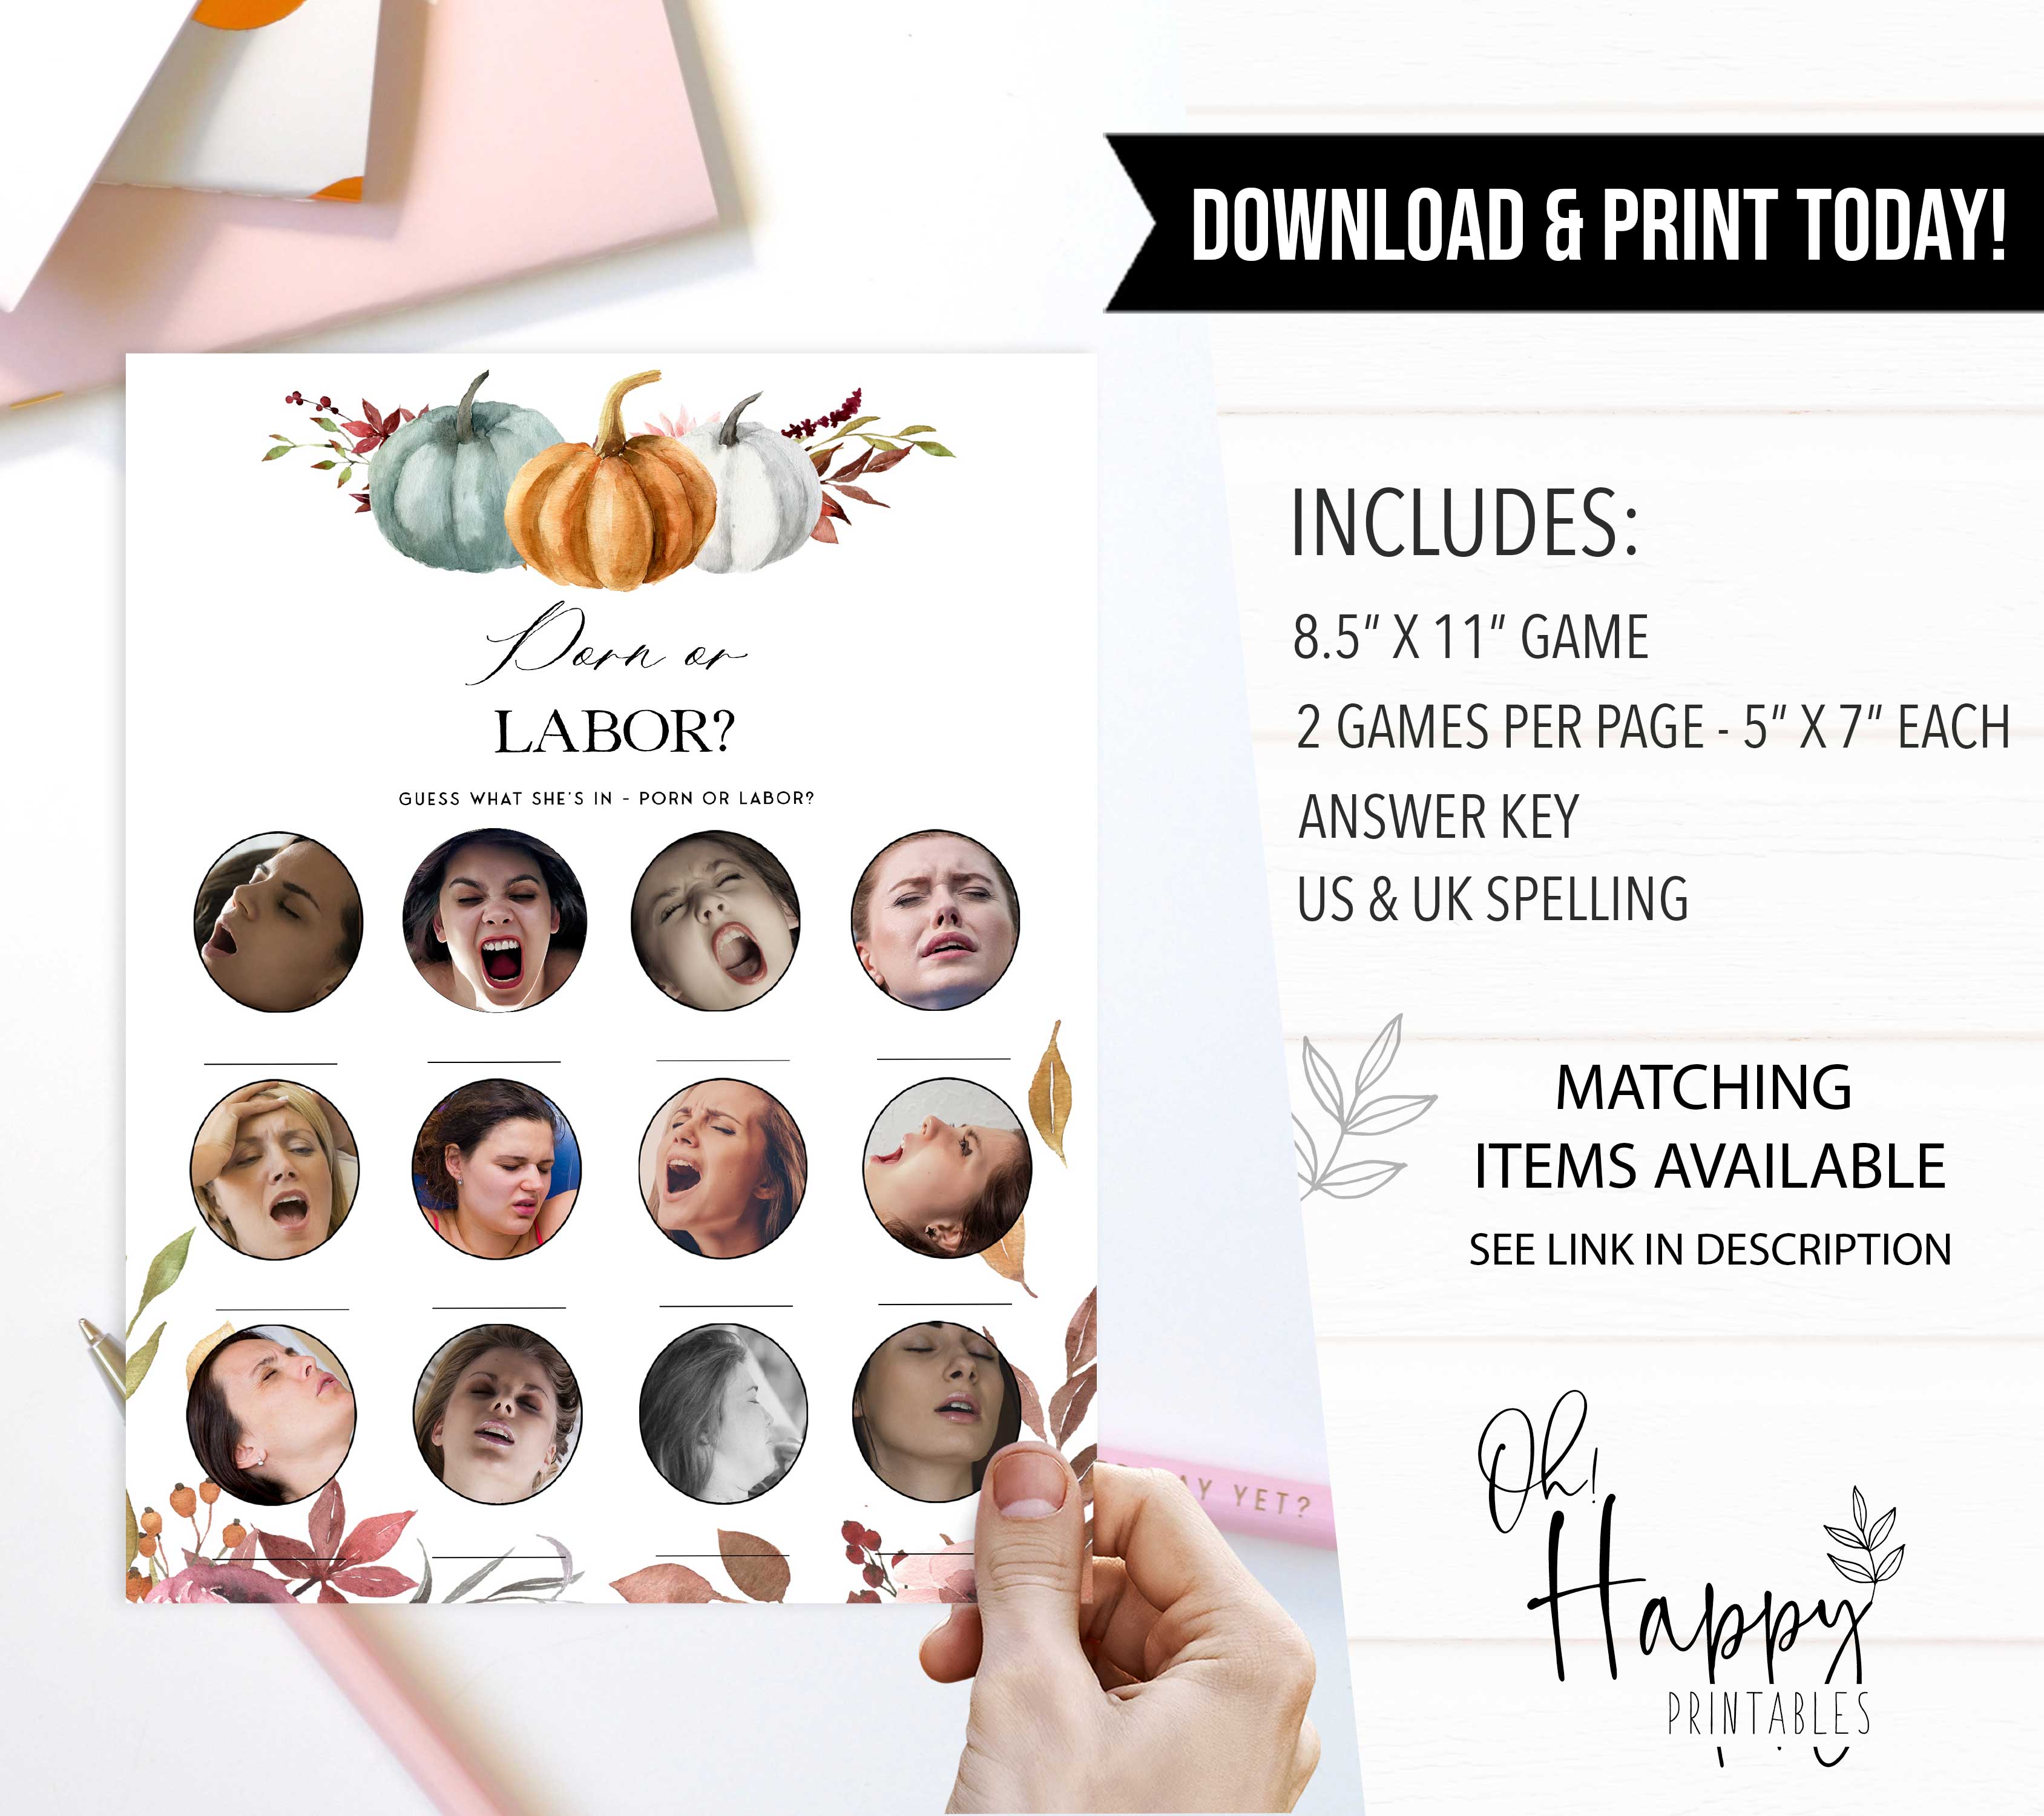 Fully editable and printable baby shower porn or labor game with a fall pumpkin design. Perfect for a Fall Pumpkin baby shower themed party